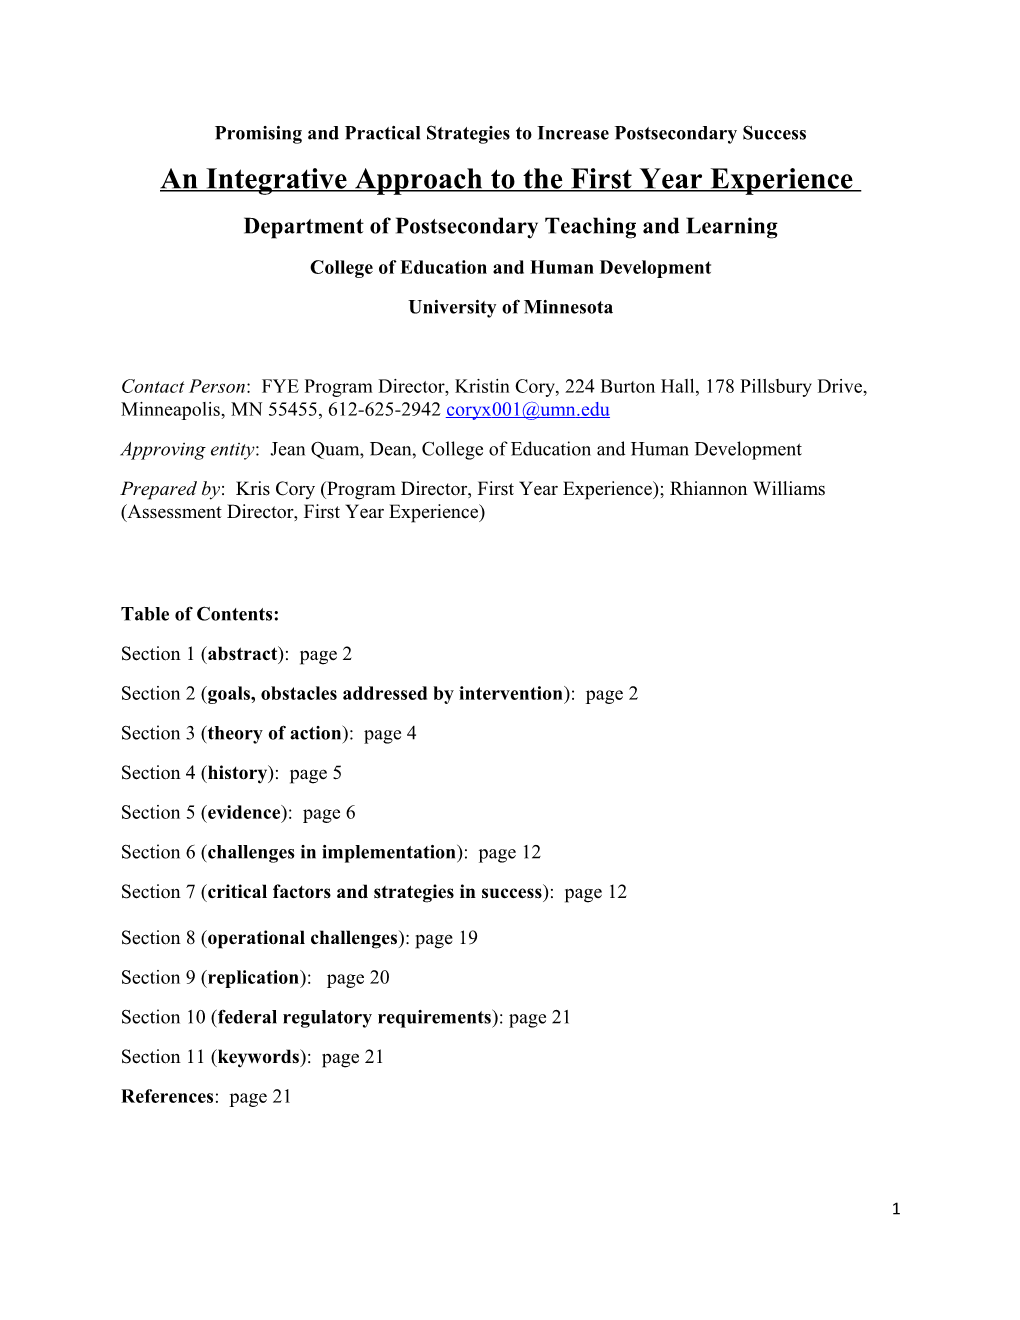 An Integrative Approach to the First Year Experience (MS Word)